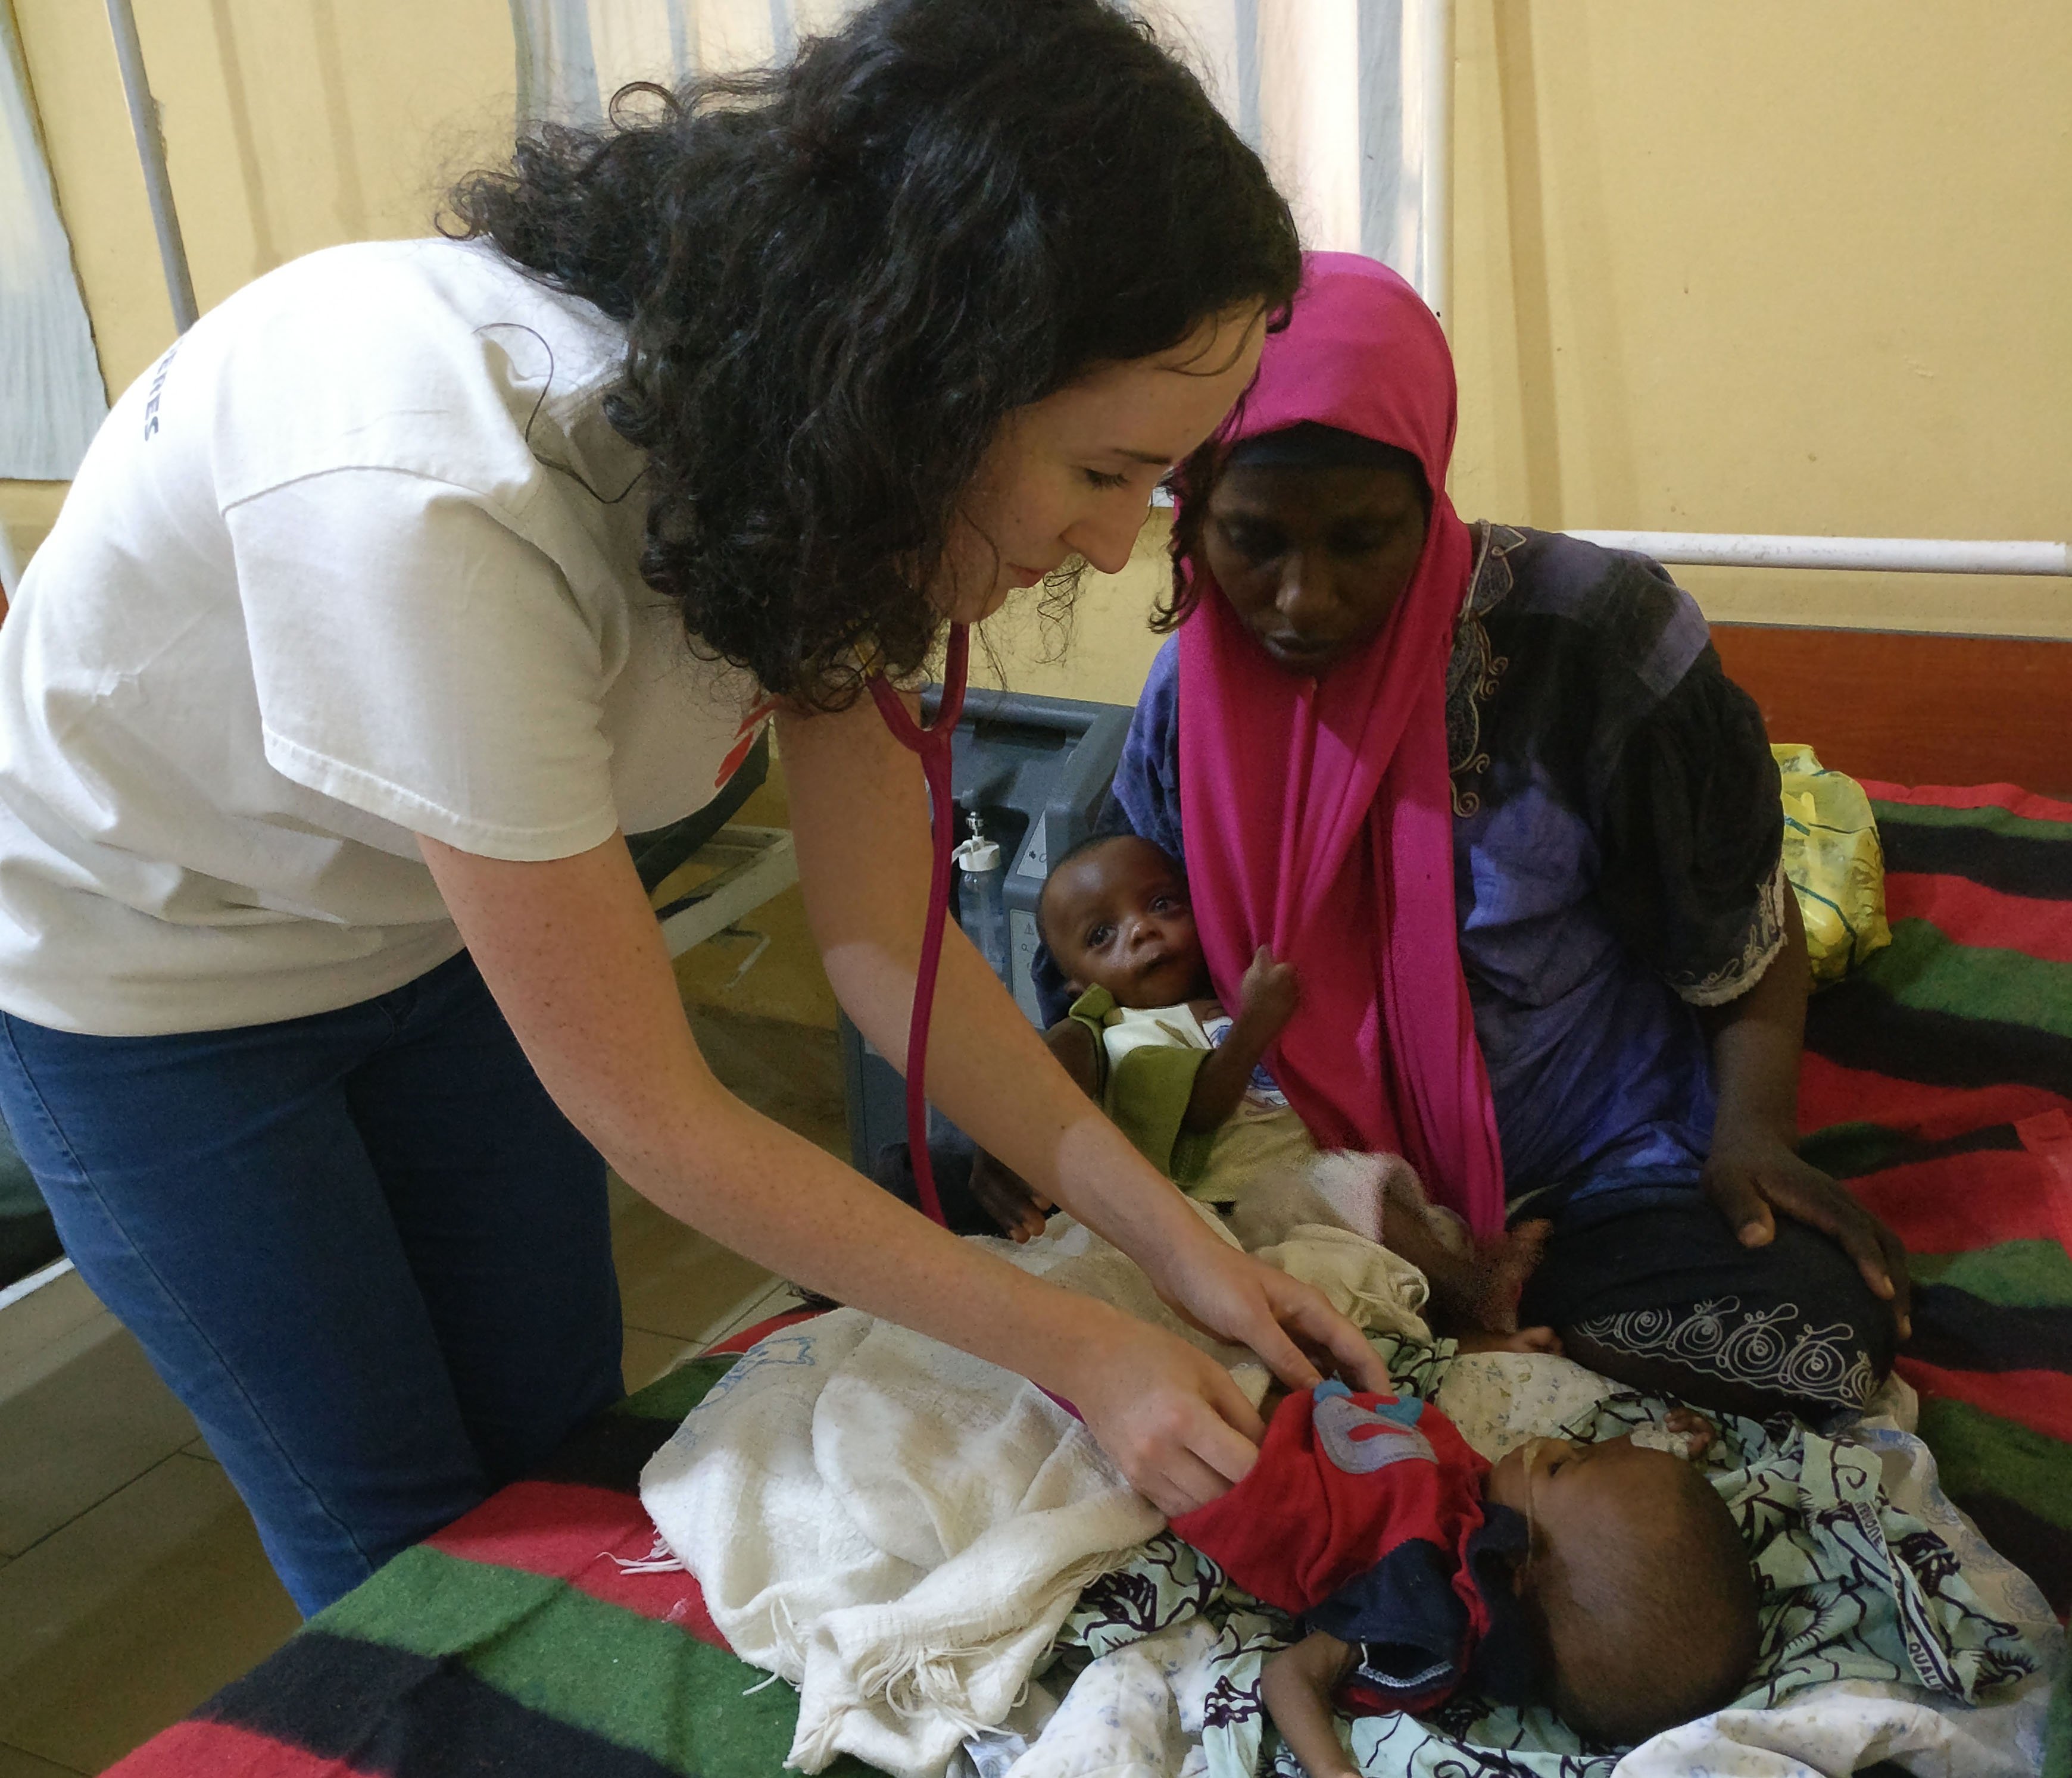 Laura Heavey examining a child suffering complications from malnutrition.